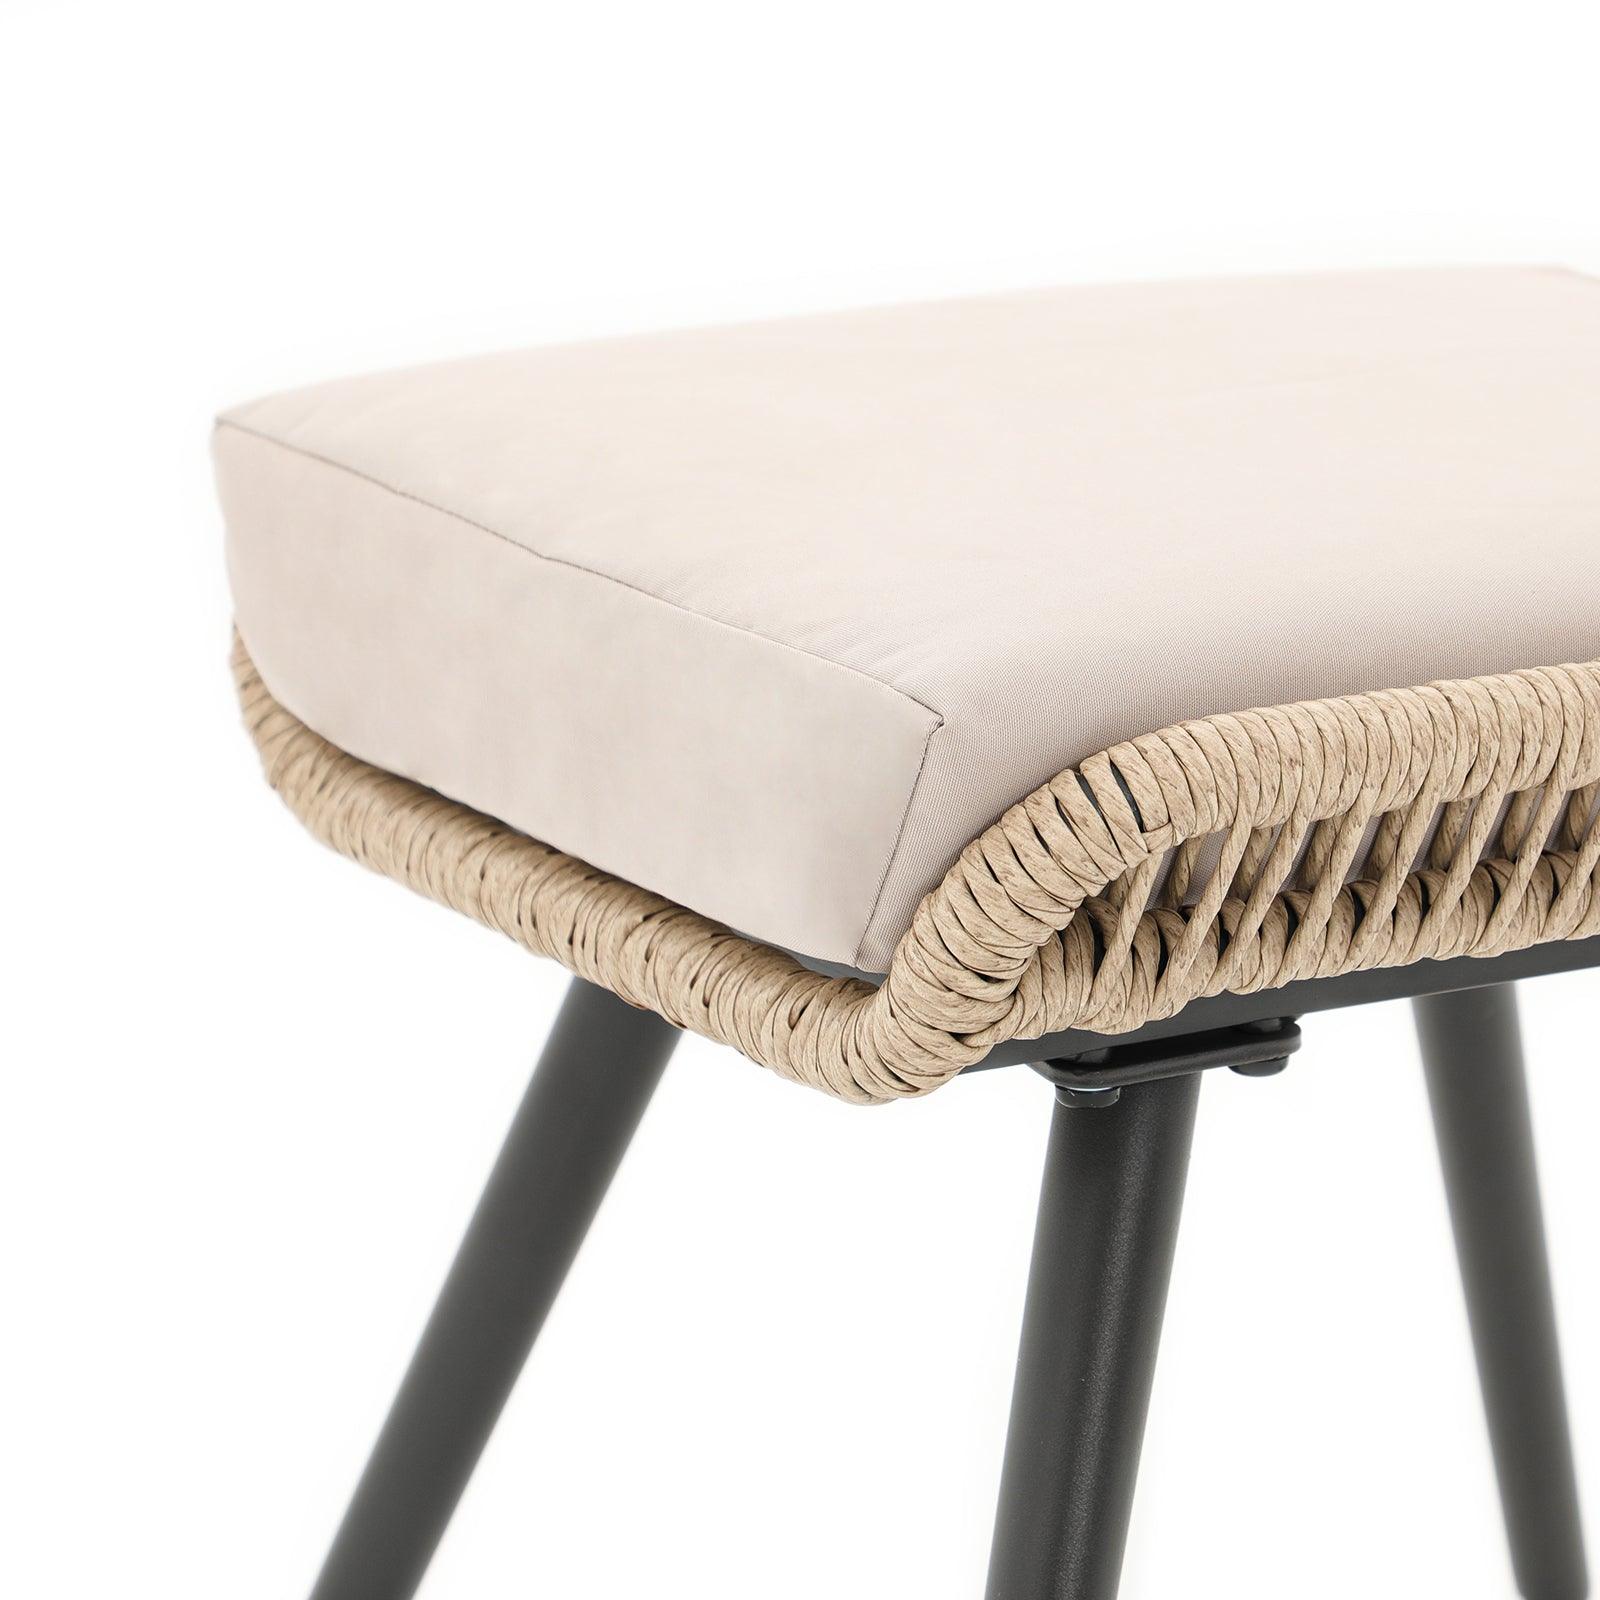 Hallerbos natural outdoor ottoman with steel frame, beige cushion, cushion detail - Jardina Furniture#Color_Natural